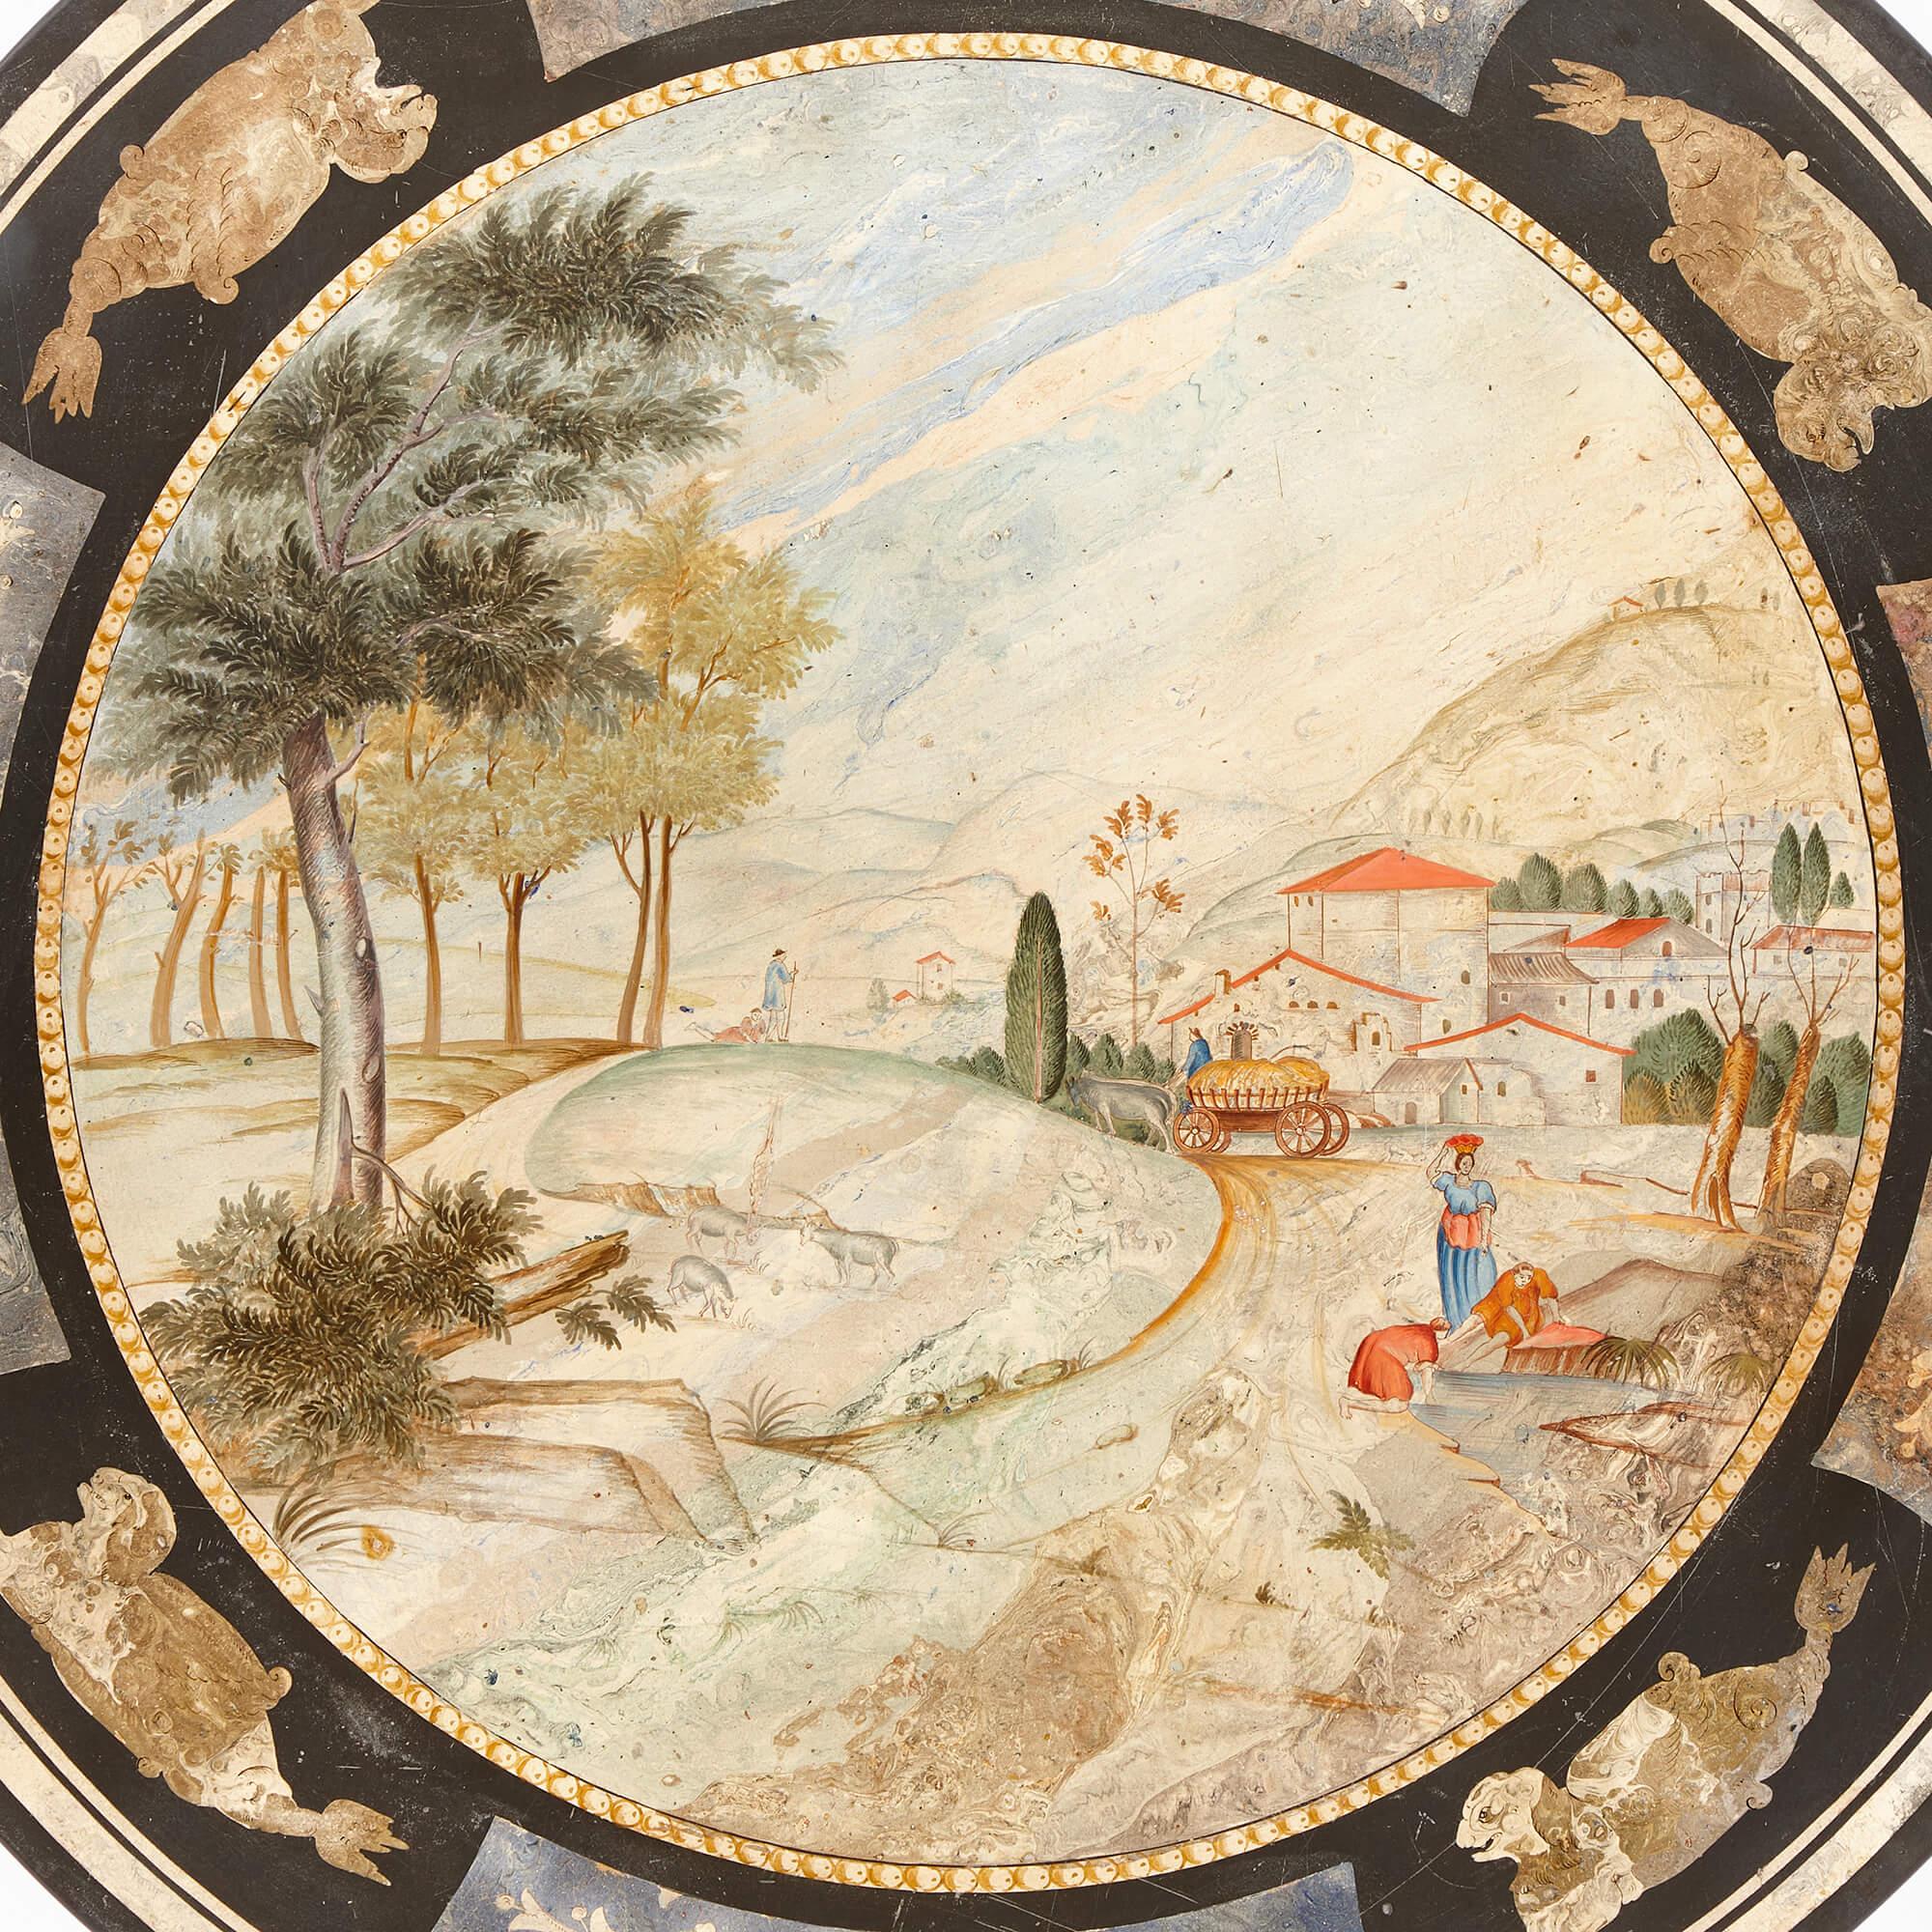 An Italian antique scagliola circular centre table top 
Italian, 19th century
Height 1.5cm, diameter 90cm

This delicately detailed circular table top is made of scagliola, a popular Material (a variation of plaster) often used in the nineteenth